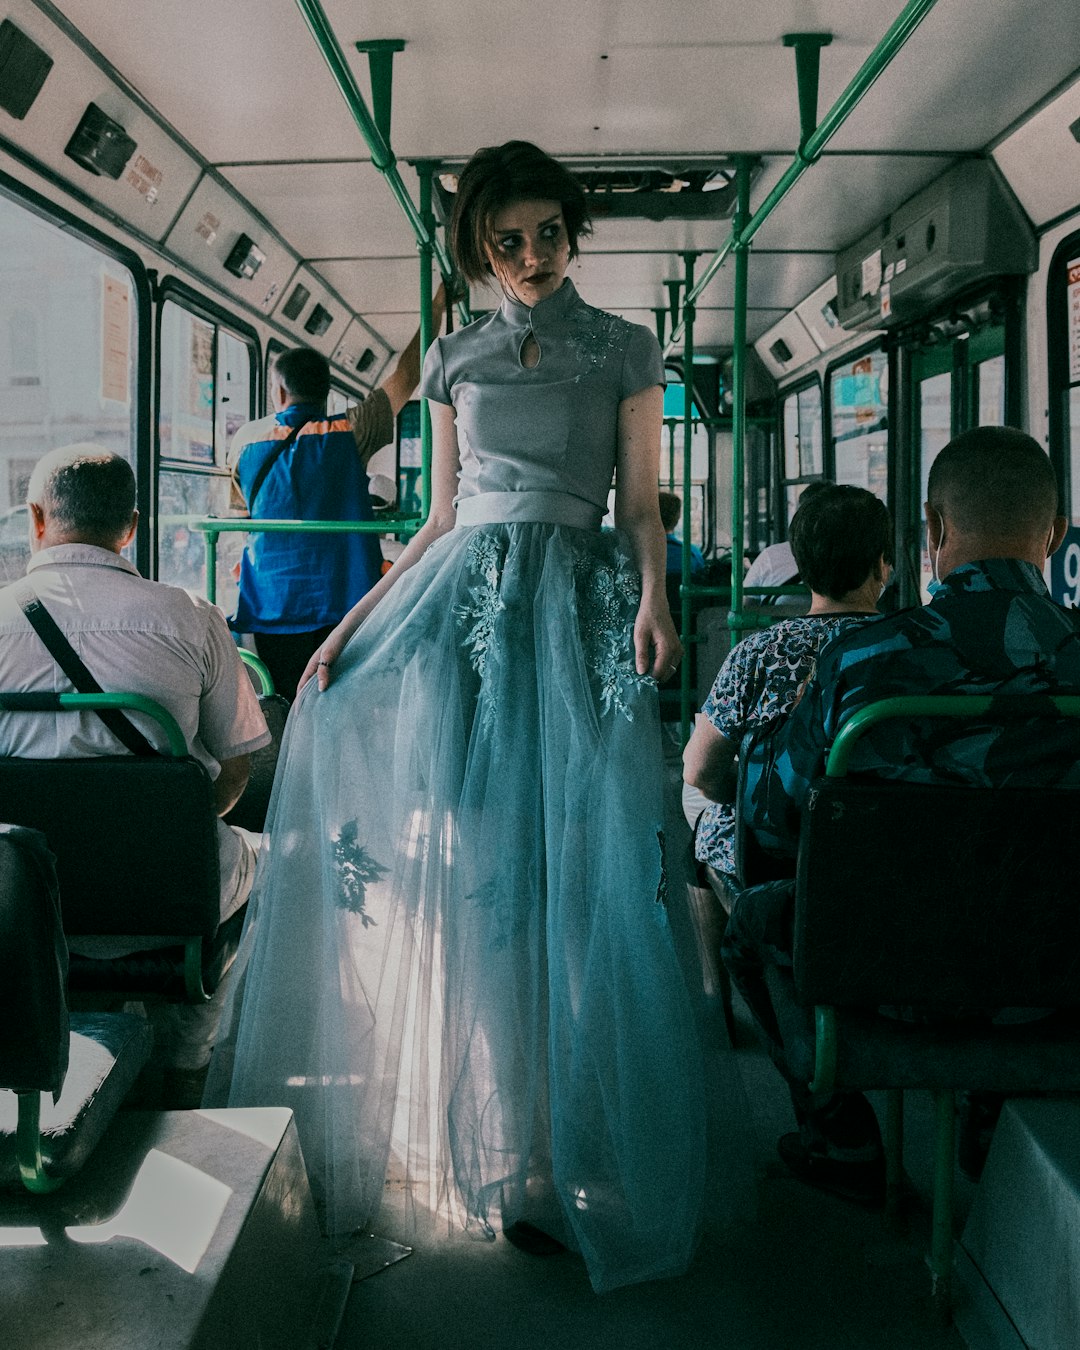 woman in white and blue dress standing in train